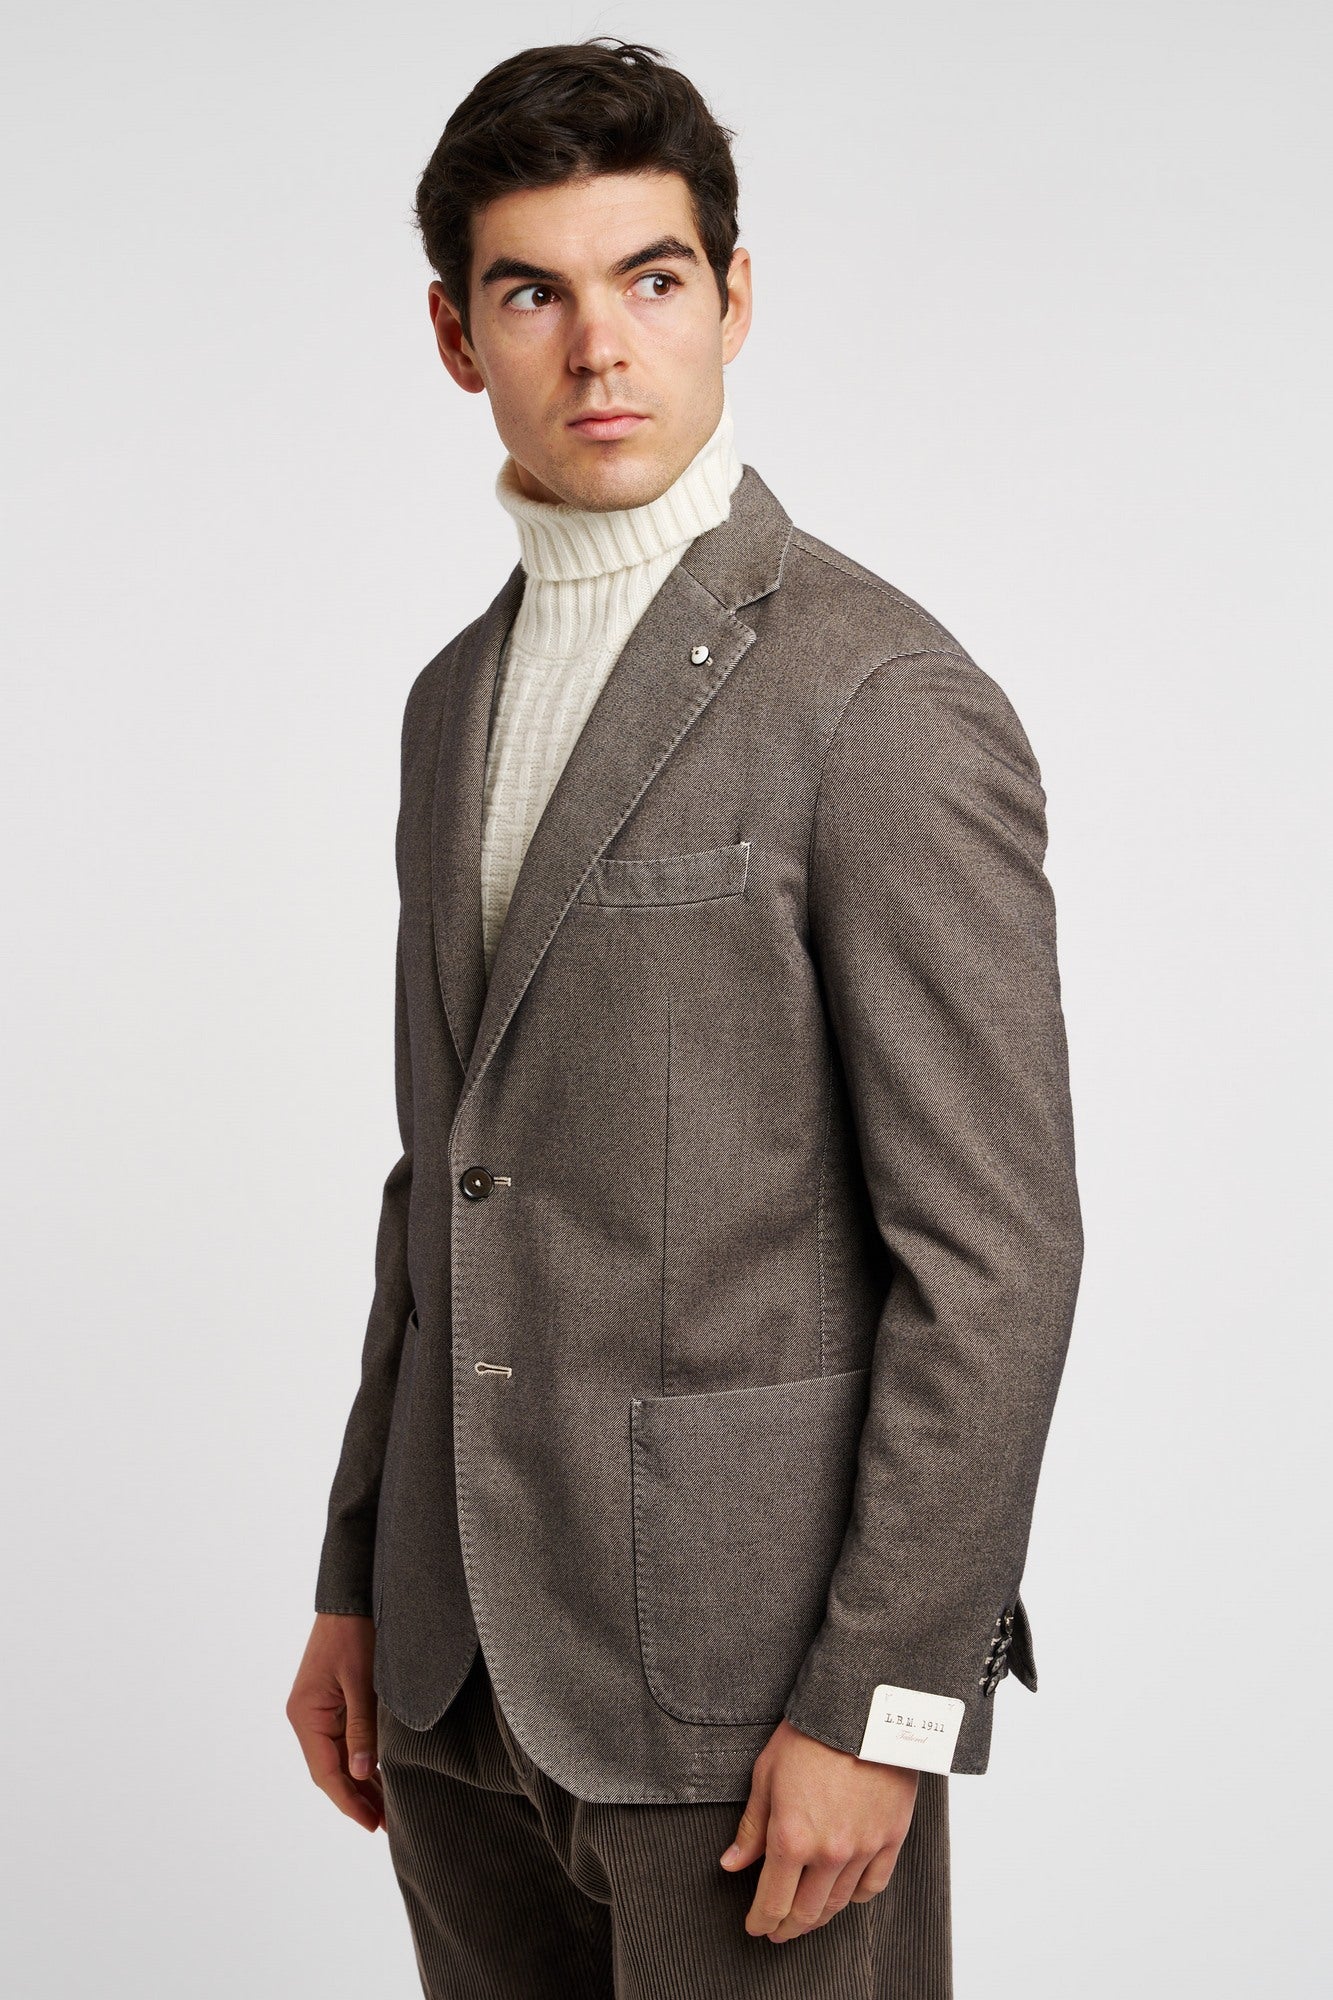 L.B.M. 1911 Single-breasted Cotton Jacket in Taupe-4